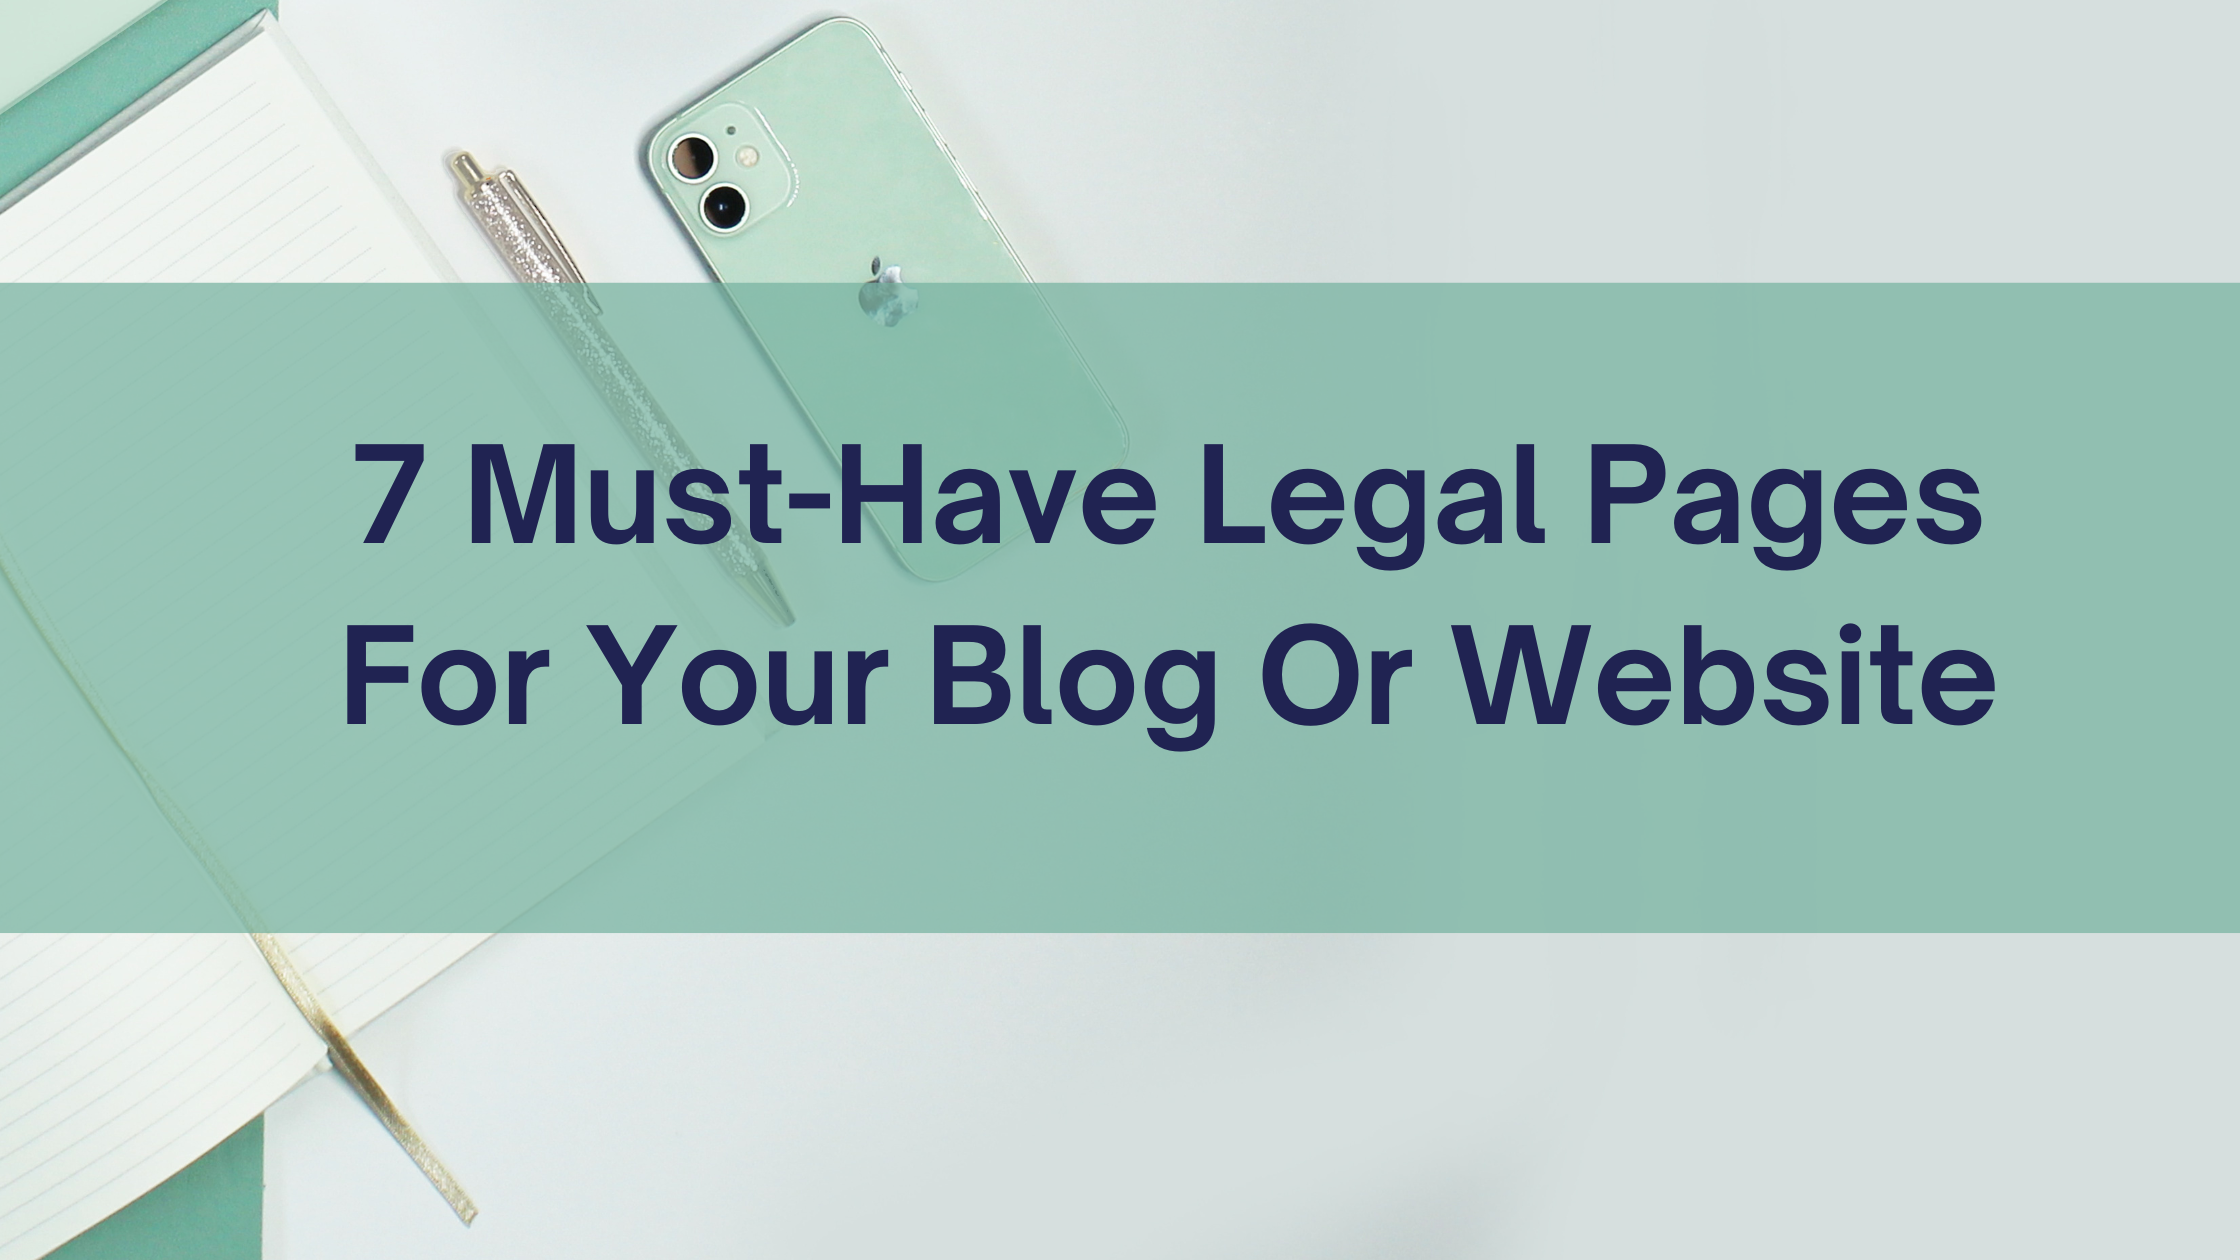 7 Must-Have Legal Pages For Your Blog Or Website